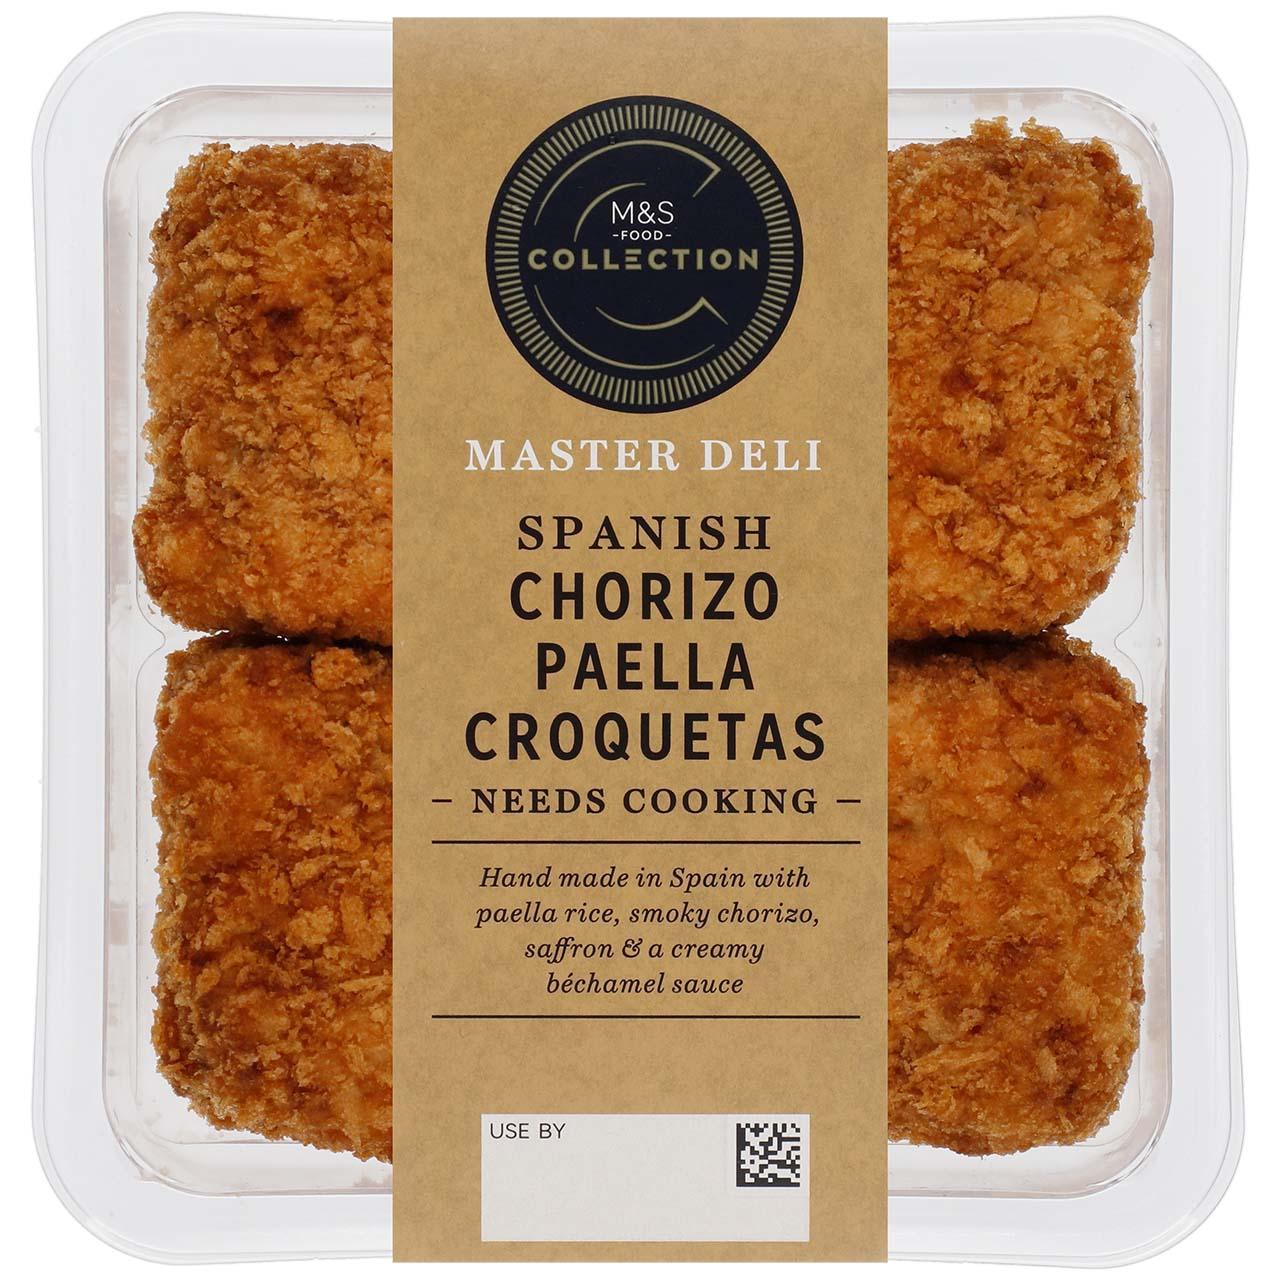 M&S has caused uproar with their ‘culturally appropriated’ croquetas